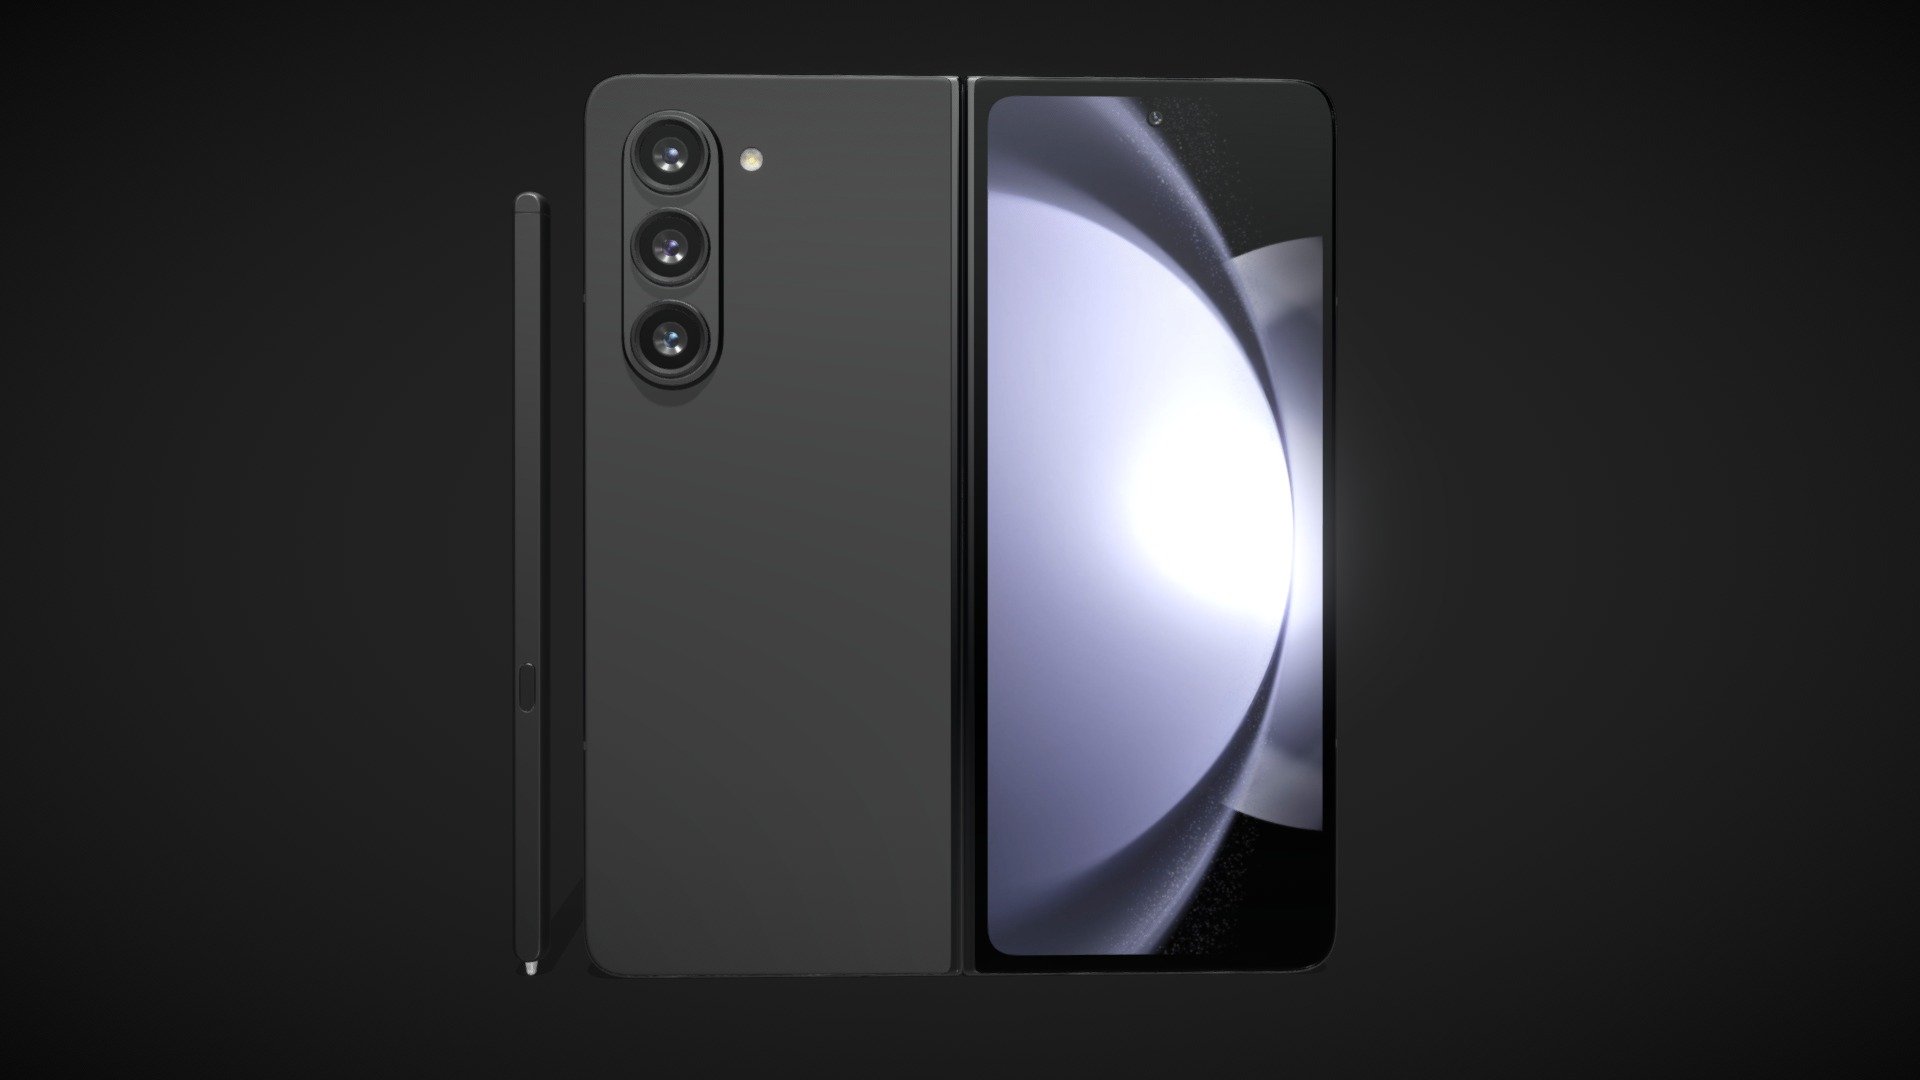 Realistic (copy) 3d model of Samsung Galaxy Z Fold 5 (Rigged, Animated).

This set:




1 file obj standard

1 file 3ds Max 2013 vray material (Rigged, Animated)

1 file 3ds Max 2013 corona material (Rigged, Animated)

1 file of 3Ds

4 file e3d full set of materials.

1 file Cinema 4d standard (Rigged, Animated).

1 file Blender (Rigged, Animated).

Topology of geometry:




forms and proportions of The 3D model

the geometry of the model was created very neatly

there are no many-sided polygons

detailed enough for close-up renders

the model optimized for turbosmooth modifier

Not collapsed the turbosmooth modified

apply the Smooth modifier with a parameter to get the desired level of detail

Organization of scene:




to all objects and materials

real world size (system units - mm)

coordinates of location of the model in space (x0, y0, z0)

does not contain extraneous or hidden objects (lights, cameras, shapes etc.)
 - Samsung Galaxy Z Fold 5 - Buy Royalty Free 3D model by madMIX 3d model